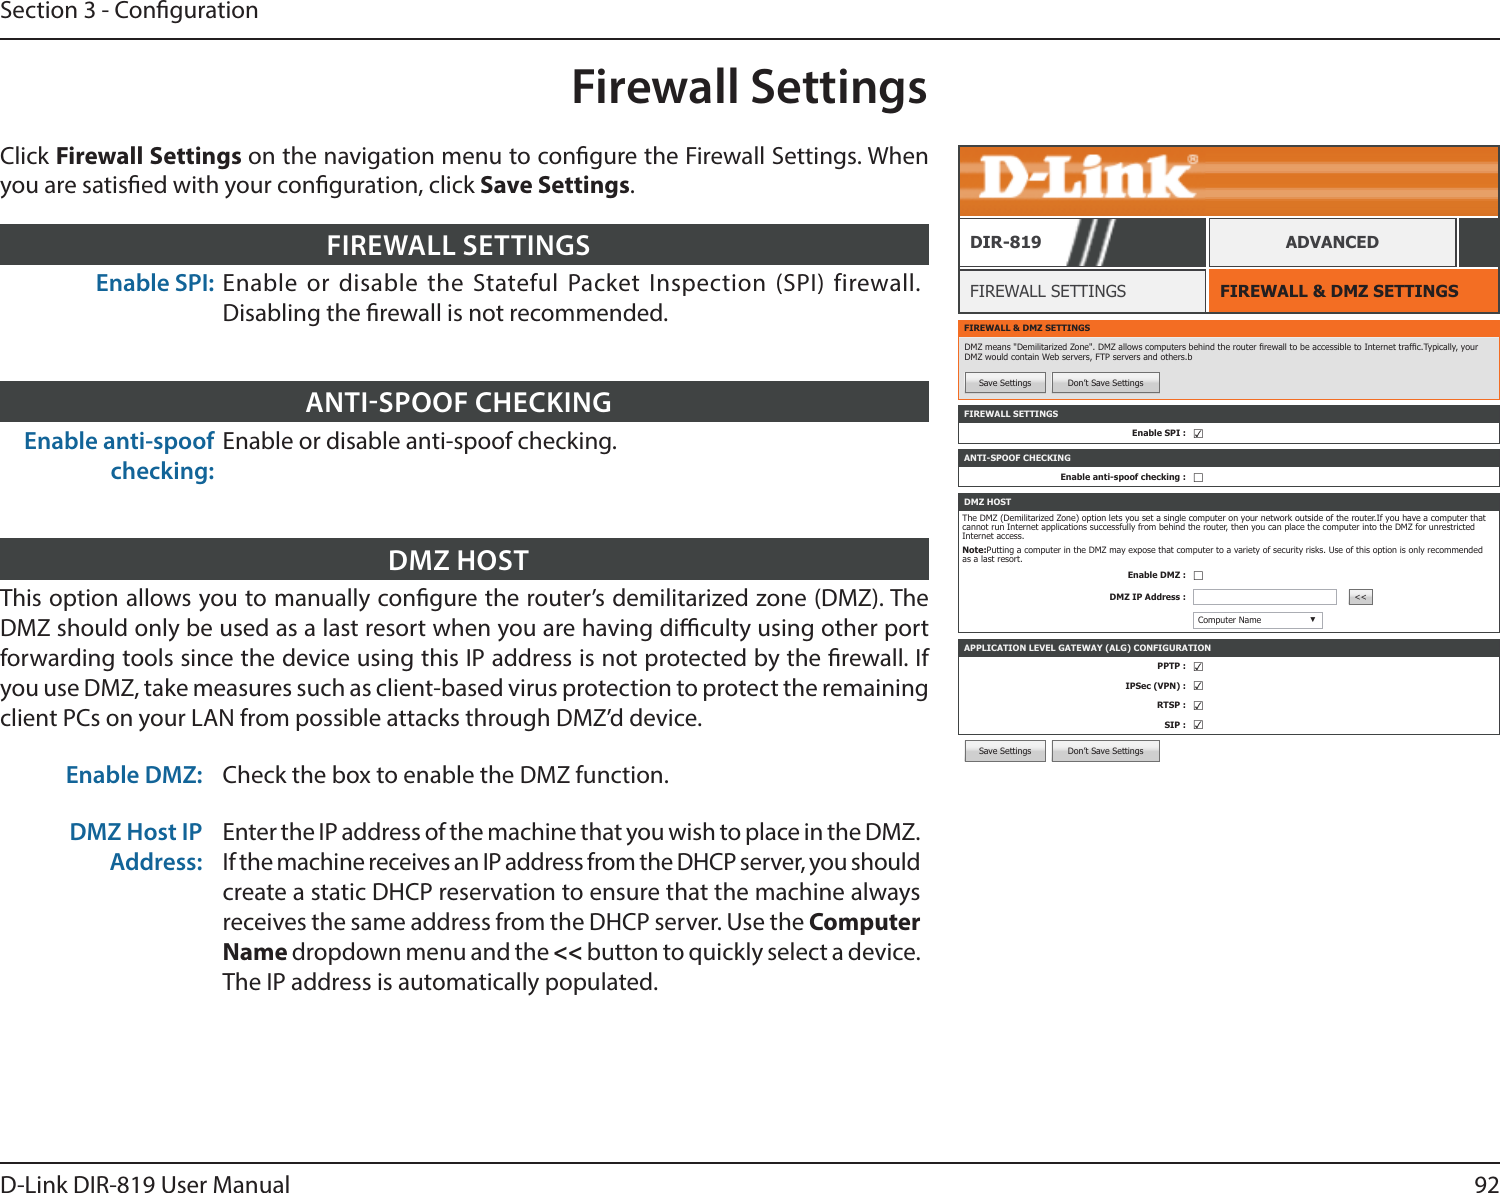 92D-Link DIR-819 User ManualSection 3 - CongurationSave Settings Don’t Save SettingsFirewall SettingsFIREWALL &amp; DMZ SETTINGSFIREWALL SETTINGSDIR-819 ADVANCEDEnable SPI: Enable or disable the Stateful Packet Inspection (SPI) firewall. Disabling the rewall is not recommended.FIREWALL SETTINGSFIREWALL &amp; DMZ SETTINGSDMZ means &quot;Demilitarized Zone&quot;. DMZ allows computers behind the router rewall to be accessible to Internet trafc.Typically, your DMZ would contain Web servers, FTP servers and others.bSave Settings Don’t Save SettingsFIREWALL SETTINGSEnable SPI : ☑APPLICATION LEVEL GATEWAY (ALG) CONFIGURATIONPPTP : ☑IPSec (VPN) : ☑RTSP : ☑SIP : ☑ANTI-SPOOF CHECKINGEnable anti-spoof checking : ☐DMZ HOSTThe DMZ (Demilitarized Zone) option lets you set a single computer on your network outside of the router.If you have a computer that cannot run Internet applications successfully from behind the router, then you can place the computer into the DMZ for unrestricted Internet access.Note:Putting a computer in the DMZ may expose that computer to a variety of security risks. Use of this option is only recommended as a last resort.Enable DMZ : ☐DMZ IP Address : &lt;&lt;Computer Name ▼Enable anti-spoof checking:Enable or disable anti-spoof checking.ANTISPOOF CHECKINGThis option allows you to manually congure the router’s demilitarized zone (DMZ). The DMZ should only be used as a last resort when you are having diculty using other port forwarding tools since the device using this IP address is not protected by the rewall. If you use DMZ, take measures such as client-based virus protection to protect the remaining client PCs on your LAN from possible attacks through DMZ’d device. Enable DMZ: Check the box to enable the DMZ function.DMZ Host IP Address:Enter the IP address of the machine that you wish to place in the DMZ. If the machine receives an IP address from the DHCP server, you should create a static DHCP reservation to ensure that the machine always receives the same address from the DHCP server. Use the Computer Name dropdown menu and the &lt;&lt; button to quickly select a device. The IP address is automatically populated.DMZ HOSTClick Firewall Settings on the navigation menu to congure the Firewall Settings. When you are satised with your conguration, click Save Settings.